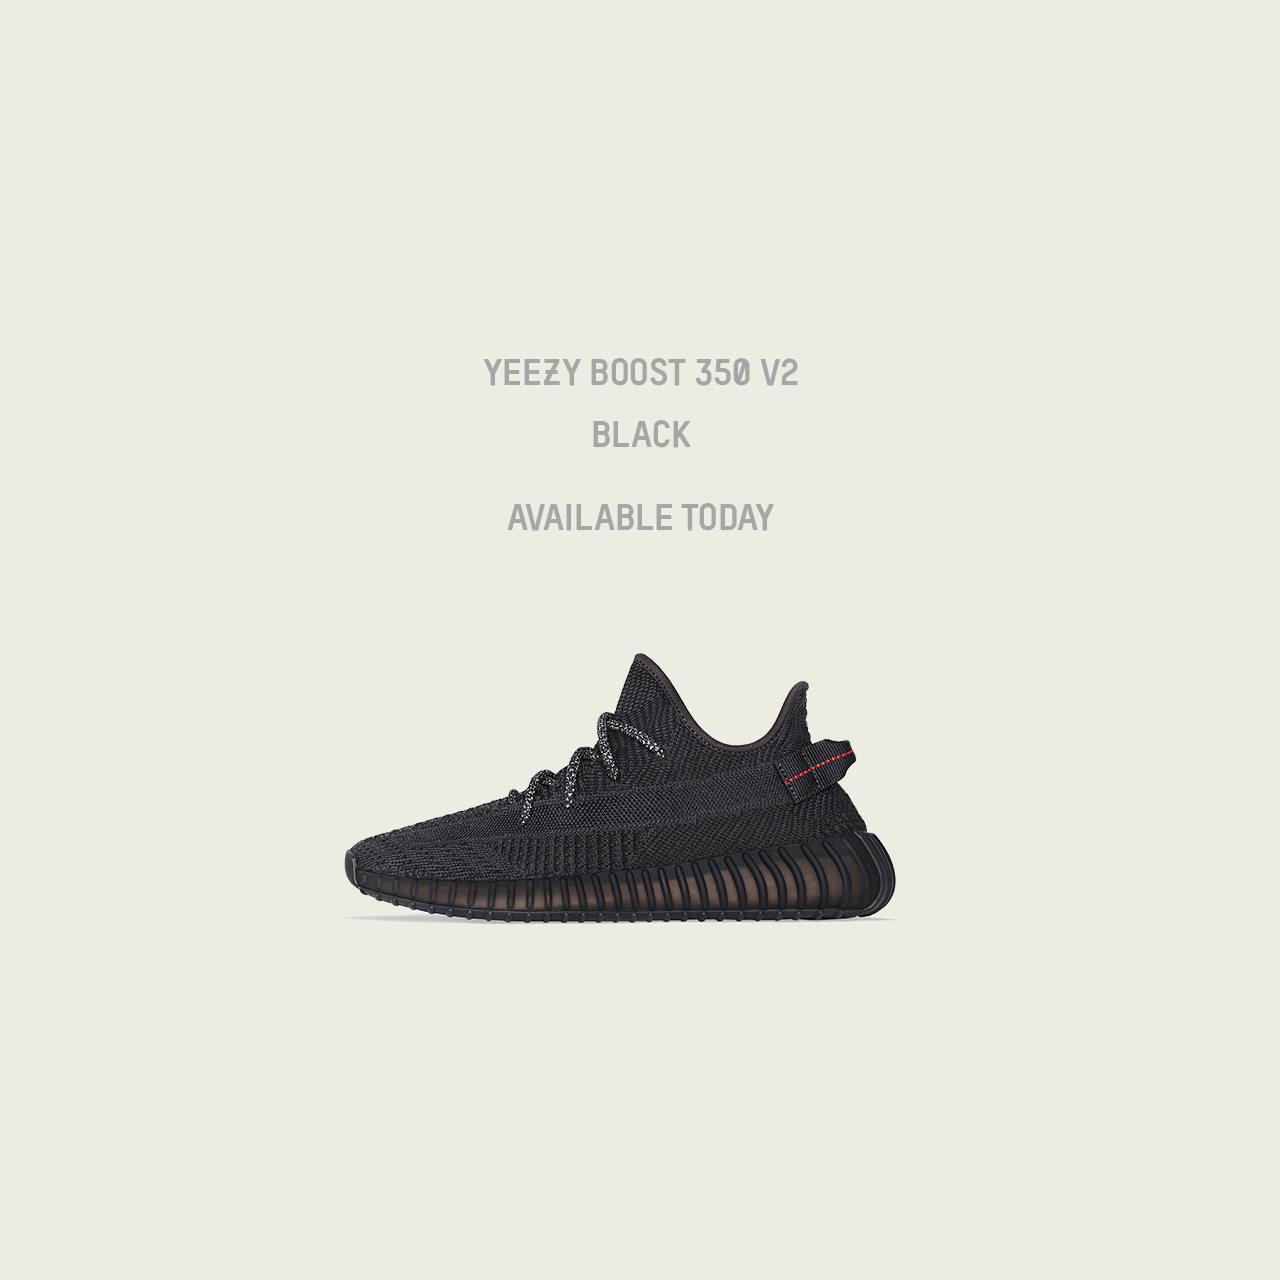 🚨 YEEZY BOOST 350 V2 Black Drops Today 